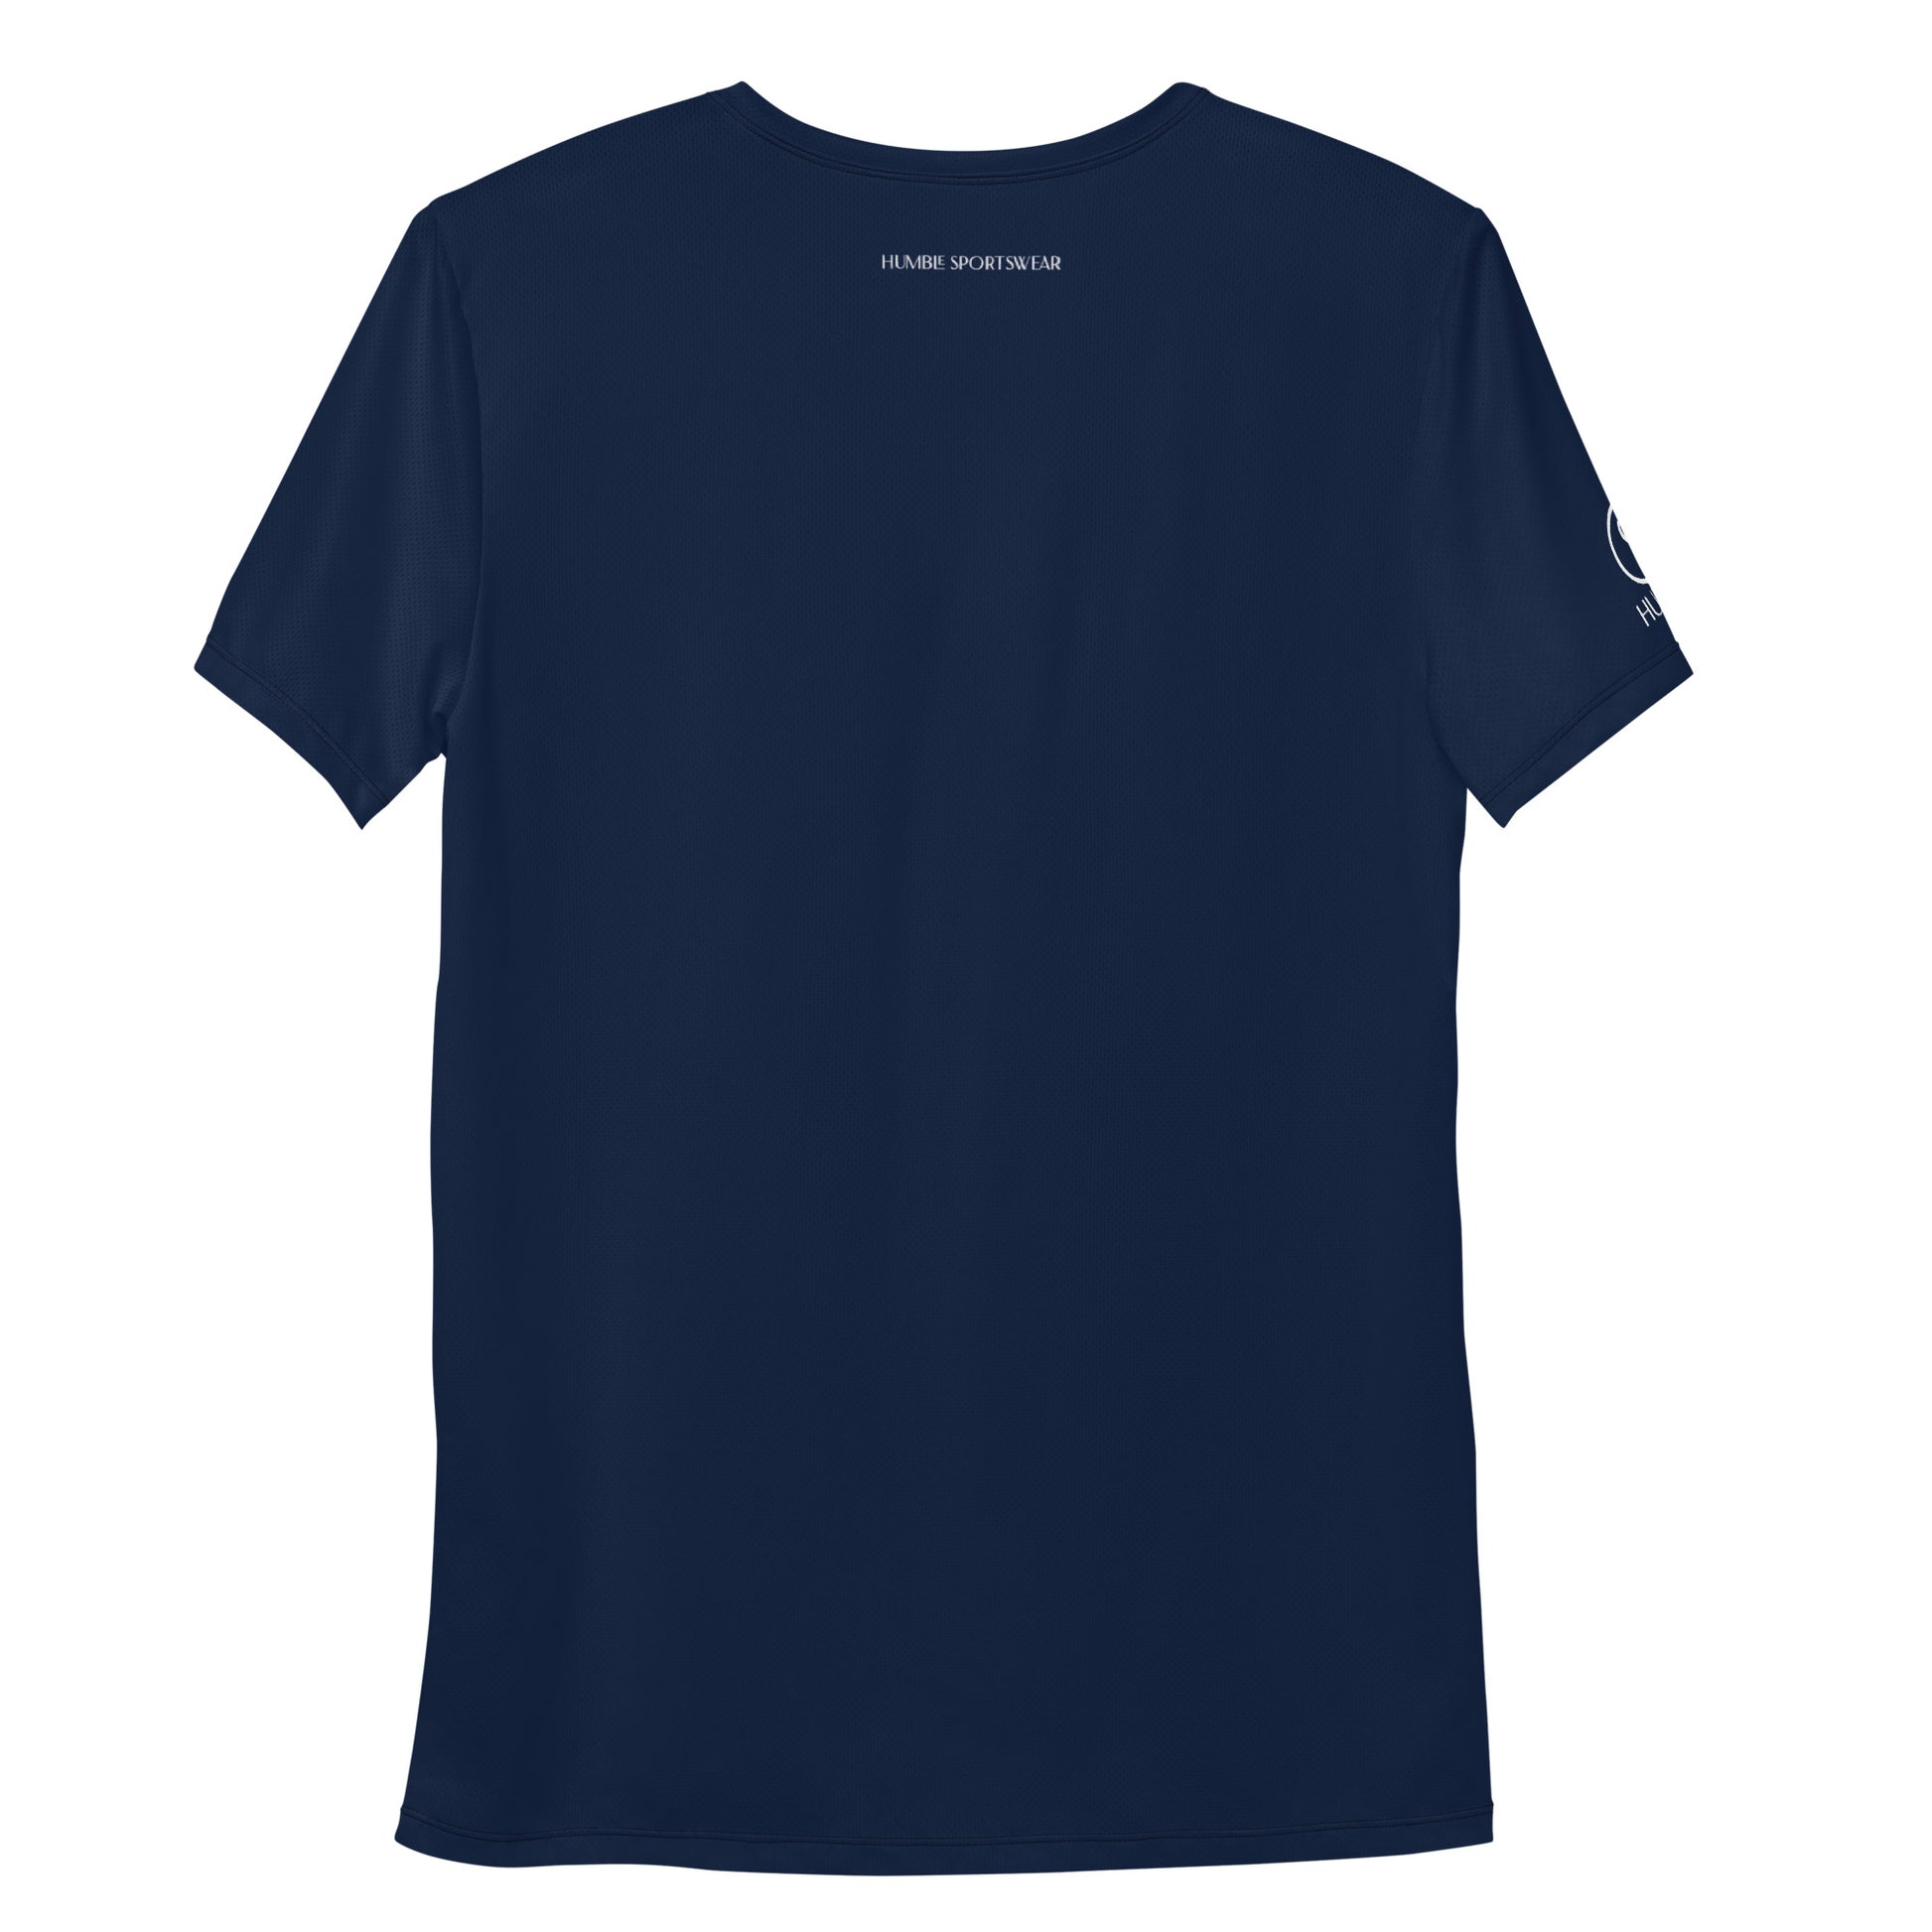 Humble Sportswear, men's mesh athletic t-shirts with moisture control